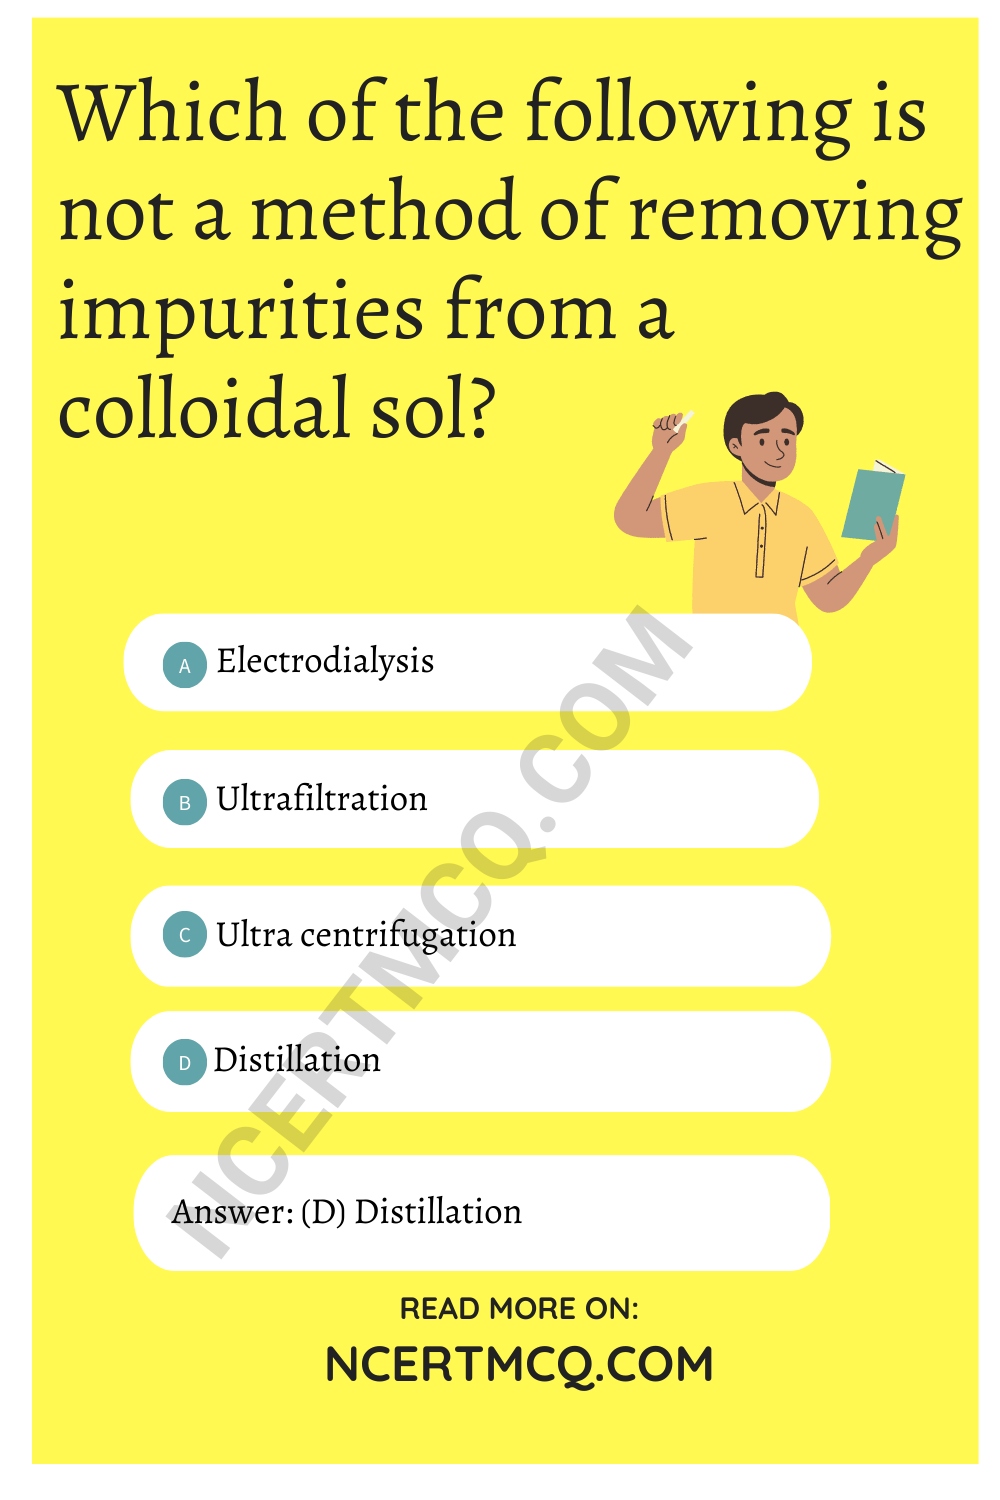 Which of the following is not a method of removing impurities from a colloidal sol?